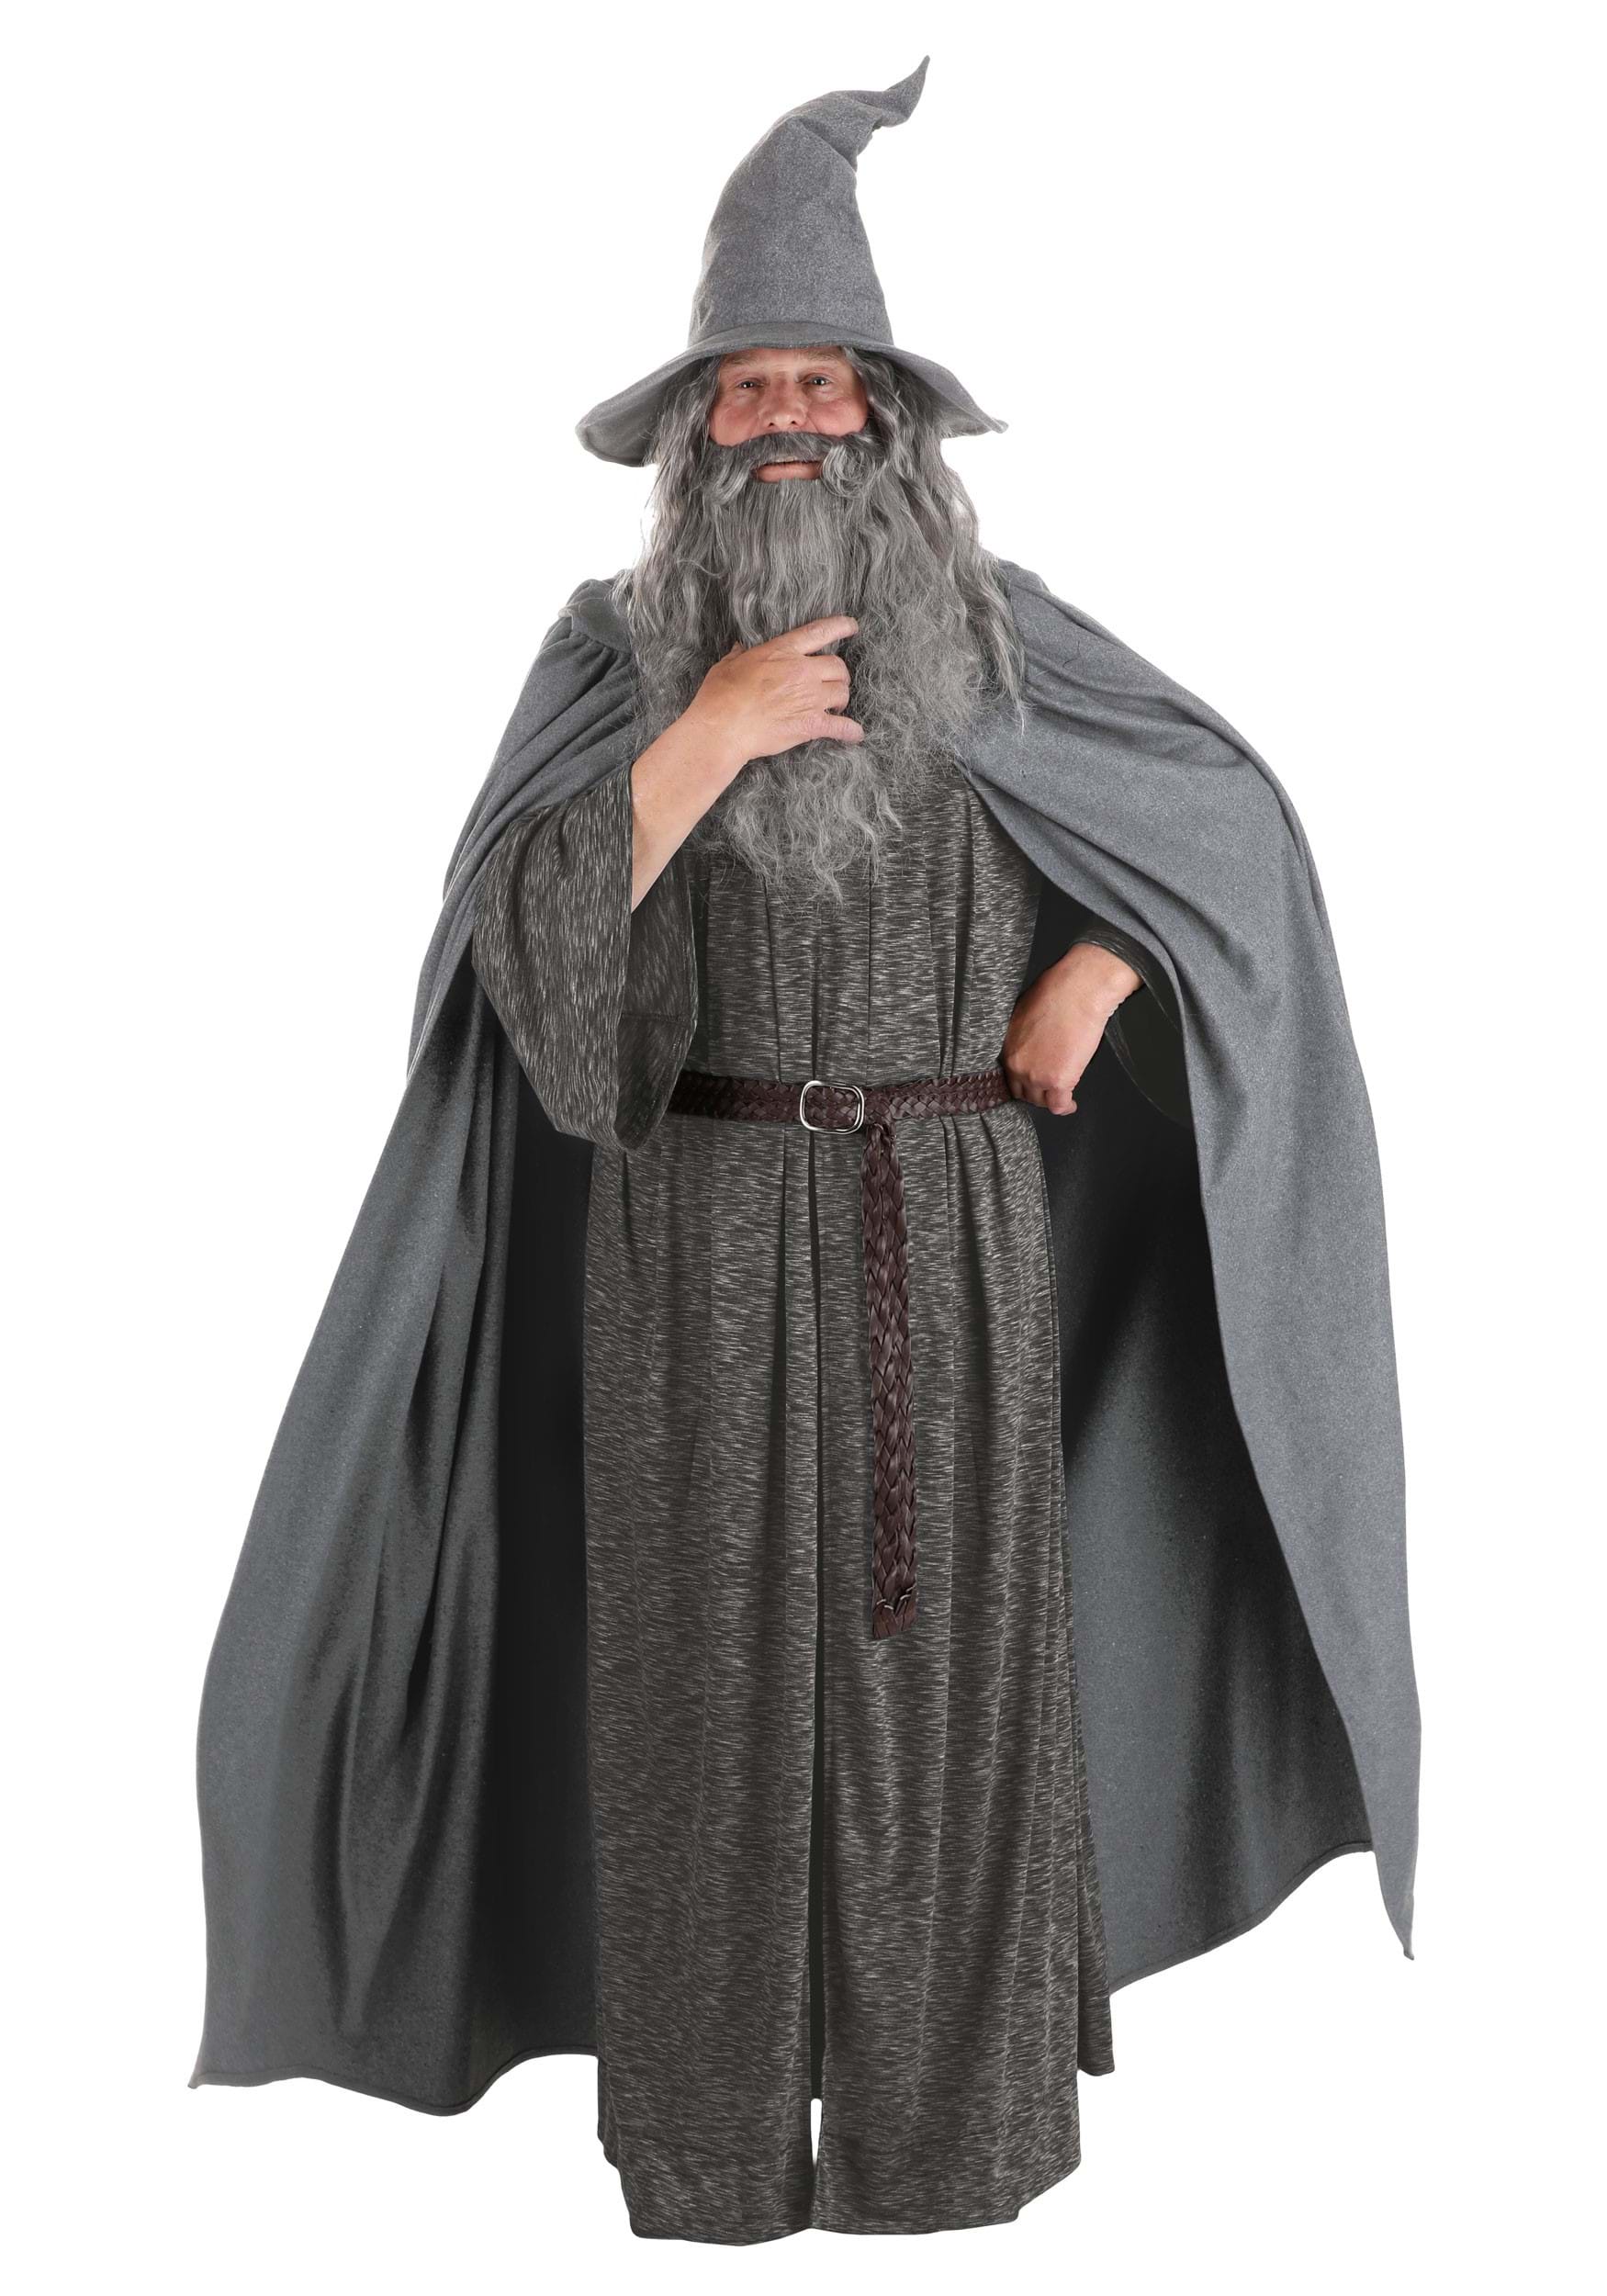 Image of Lord of the Rings Gandalf the Grey Costume for Men ID FUN3751AD-S